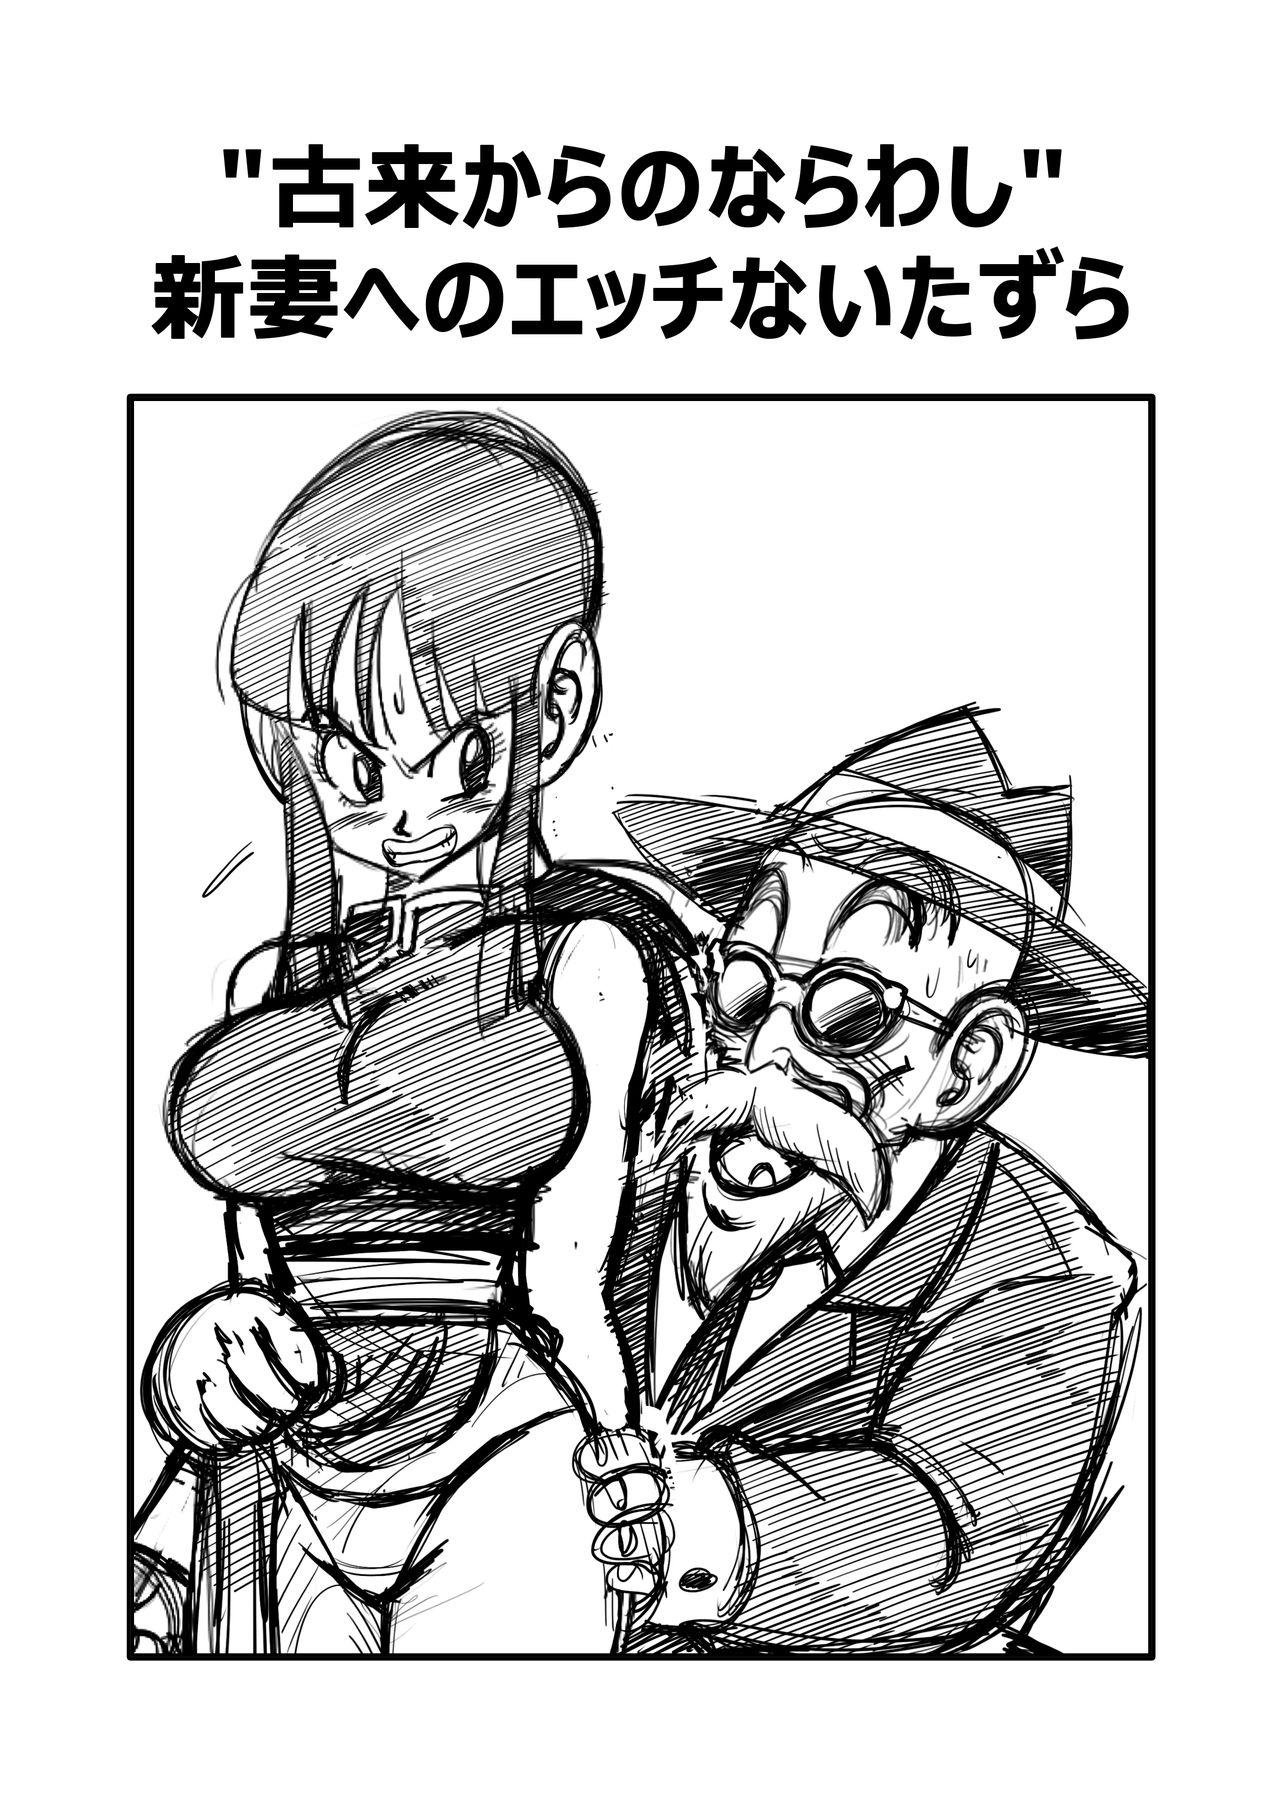 Hymen "An Ancient Tradition" - Young Wife is Harassed! - Dragon ball z Camgirl - Page 3